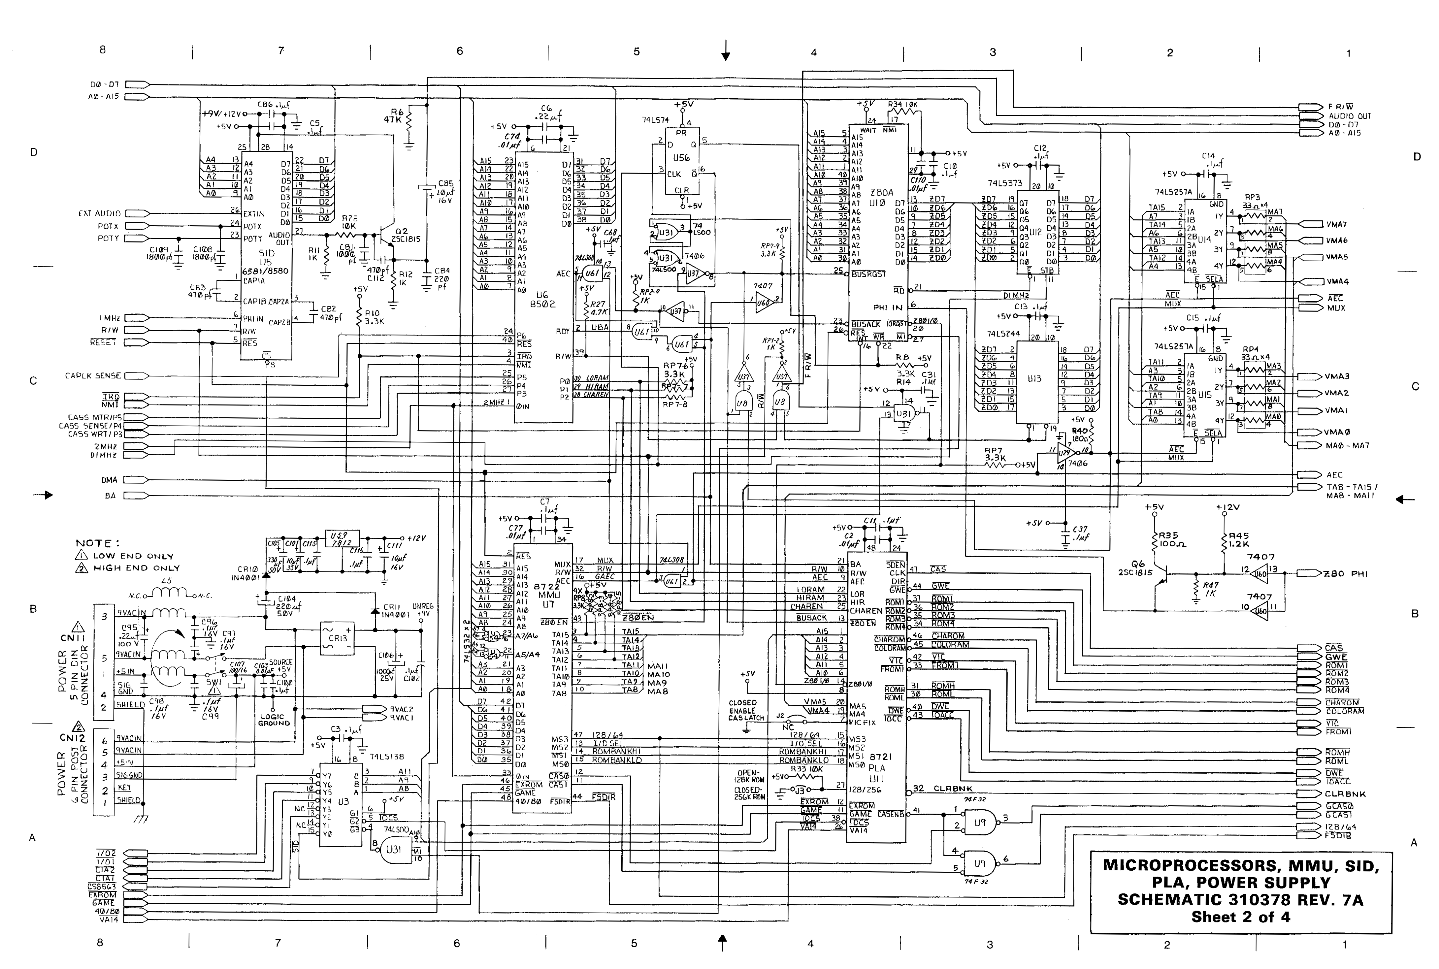 [Microprocessors, MMU, SID, PLA, power supply  Schematic 310378 Rev. 7A  Sheet 3 of 4]